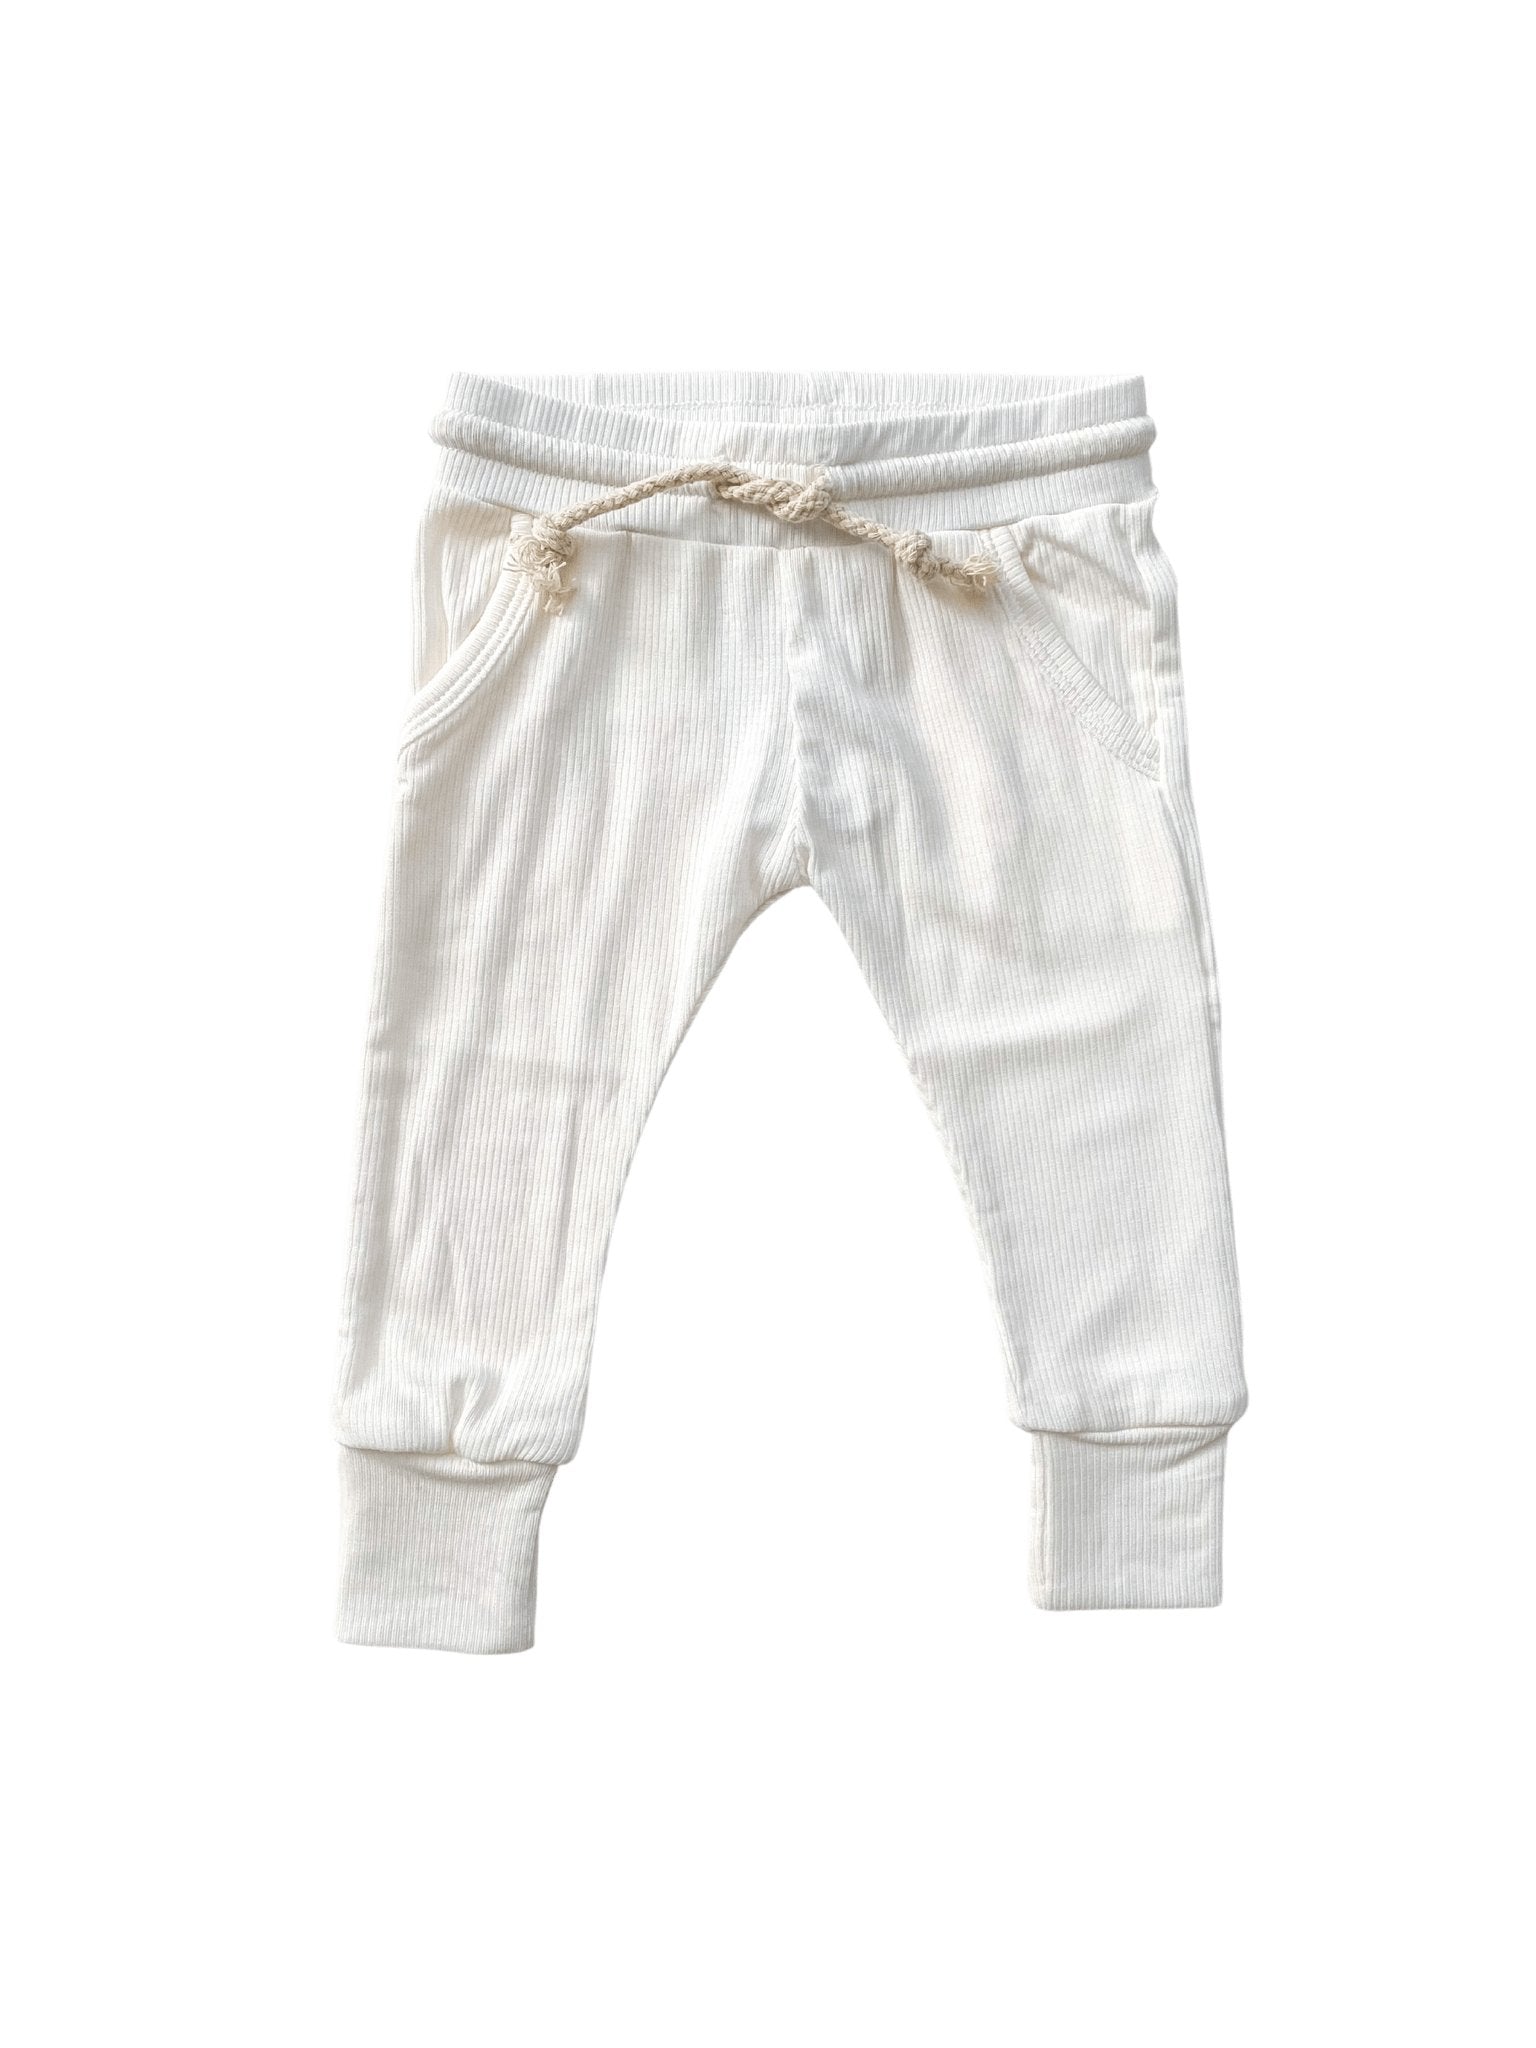 Ribbed Jogger Pants - Off White - Harp Angel Boutique